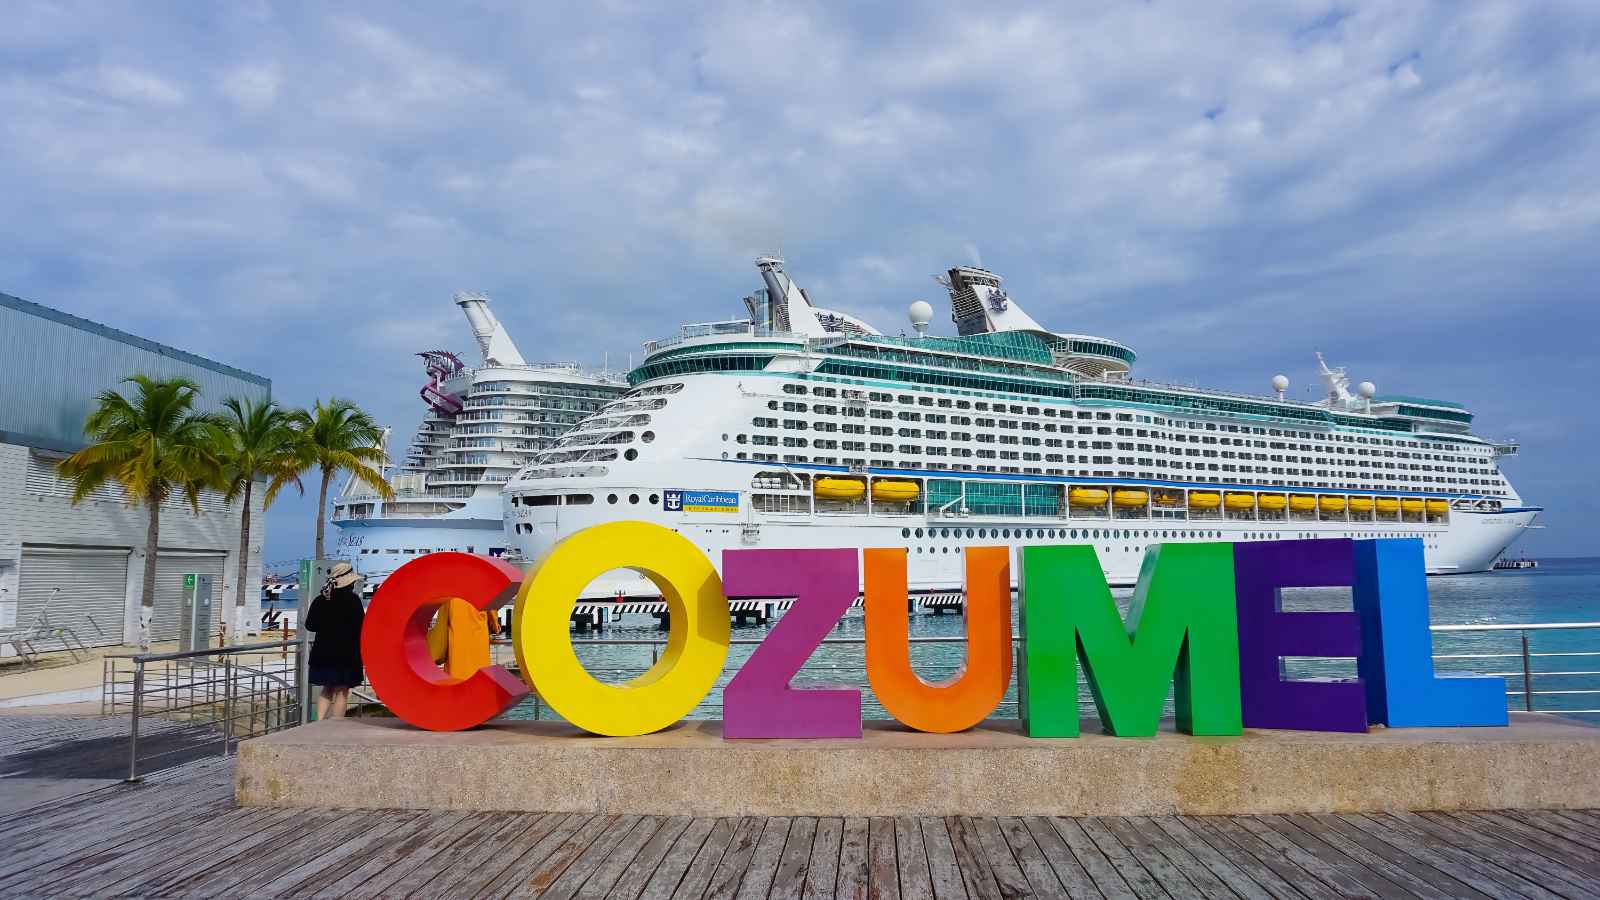 Best Things to do in Cozumel Cozumel How to Get to Cozumel Cruiseship 